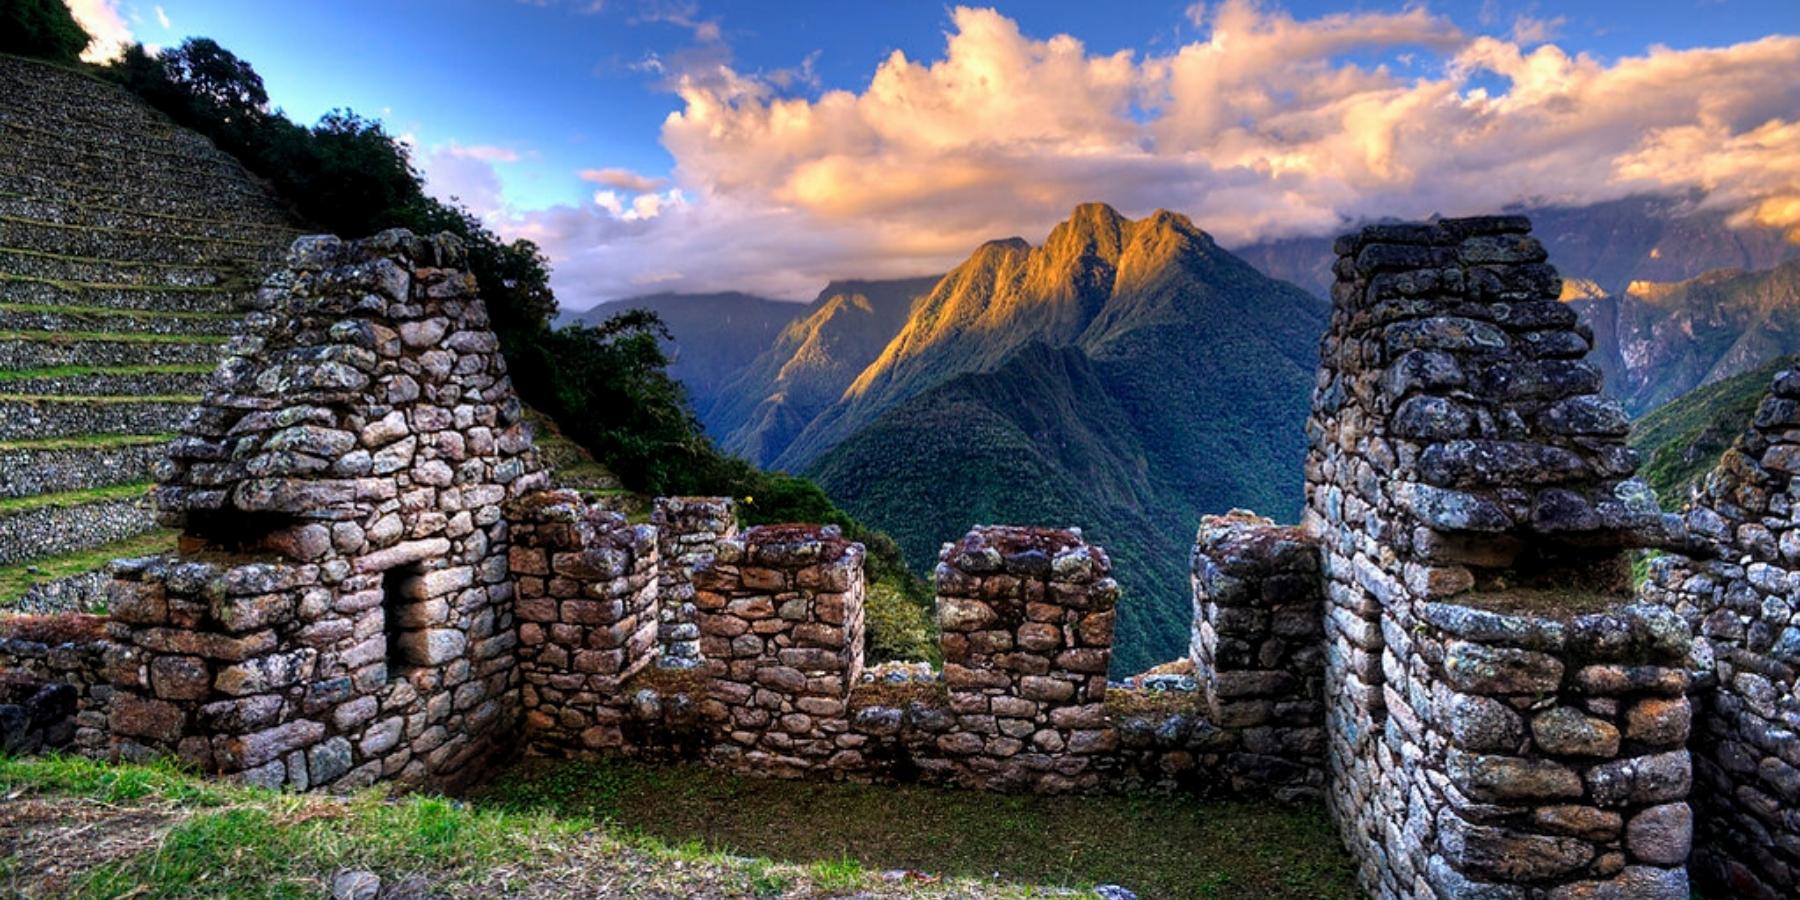 BEST TIME TO HIKE INCA TRAIL